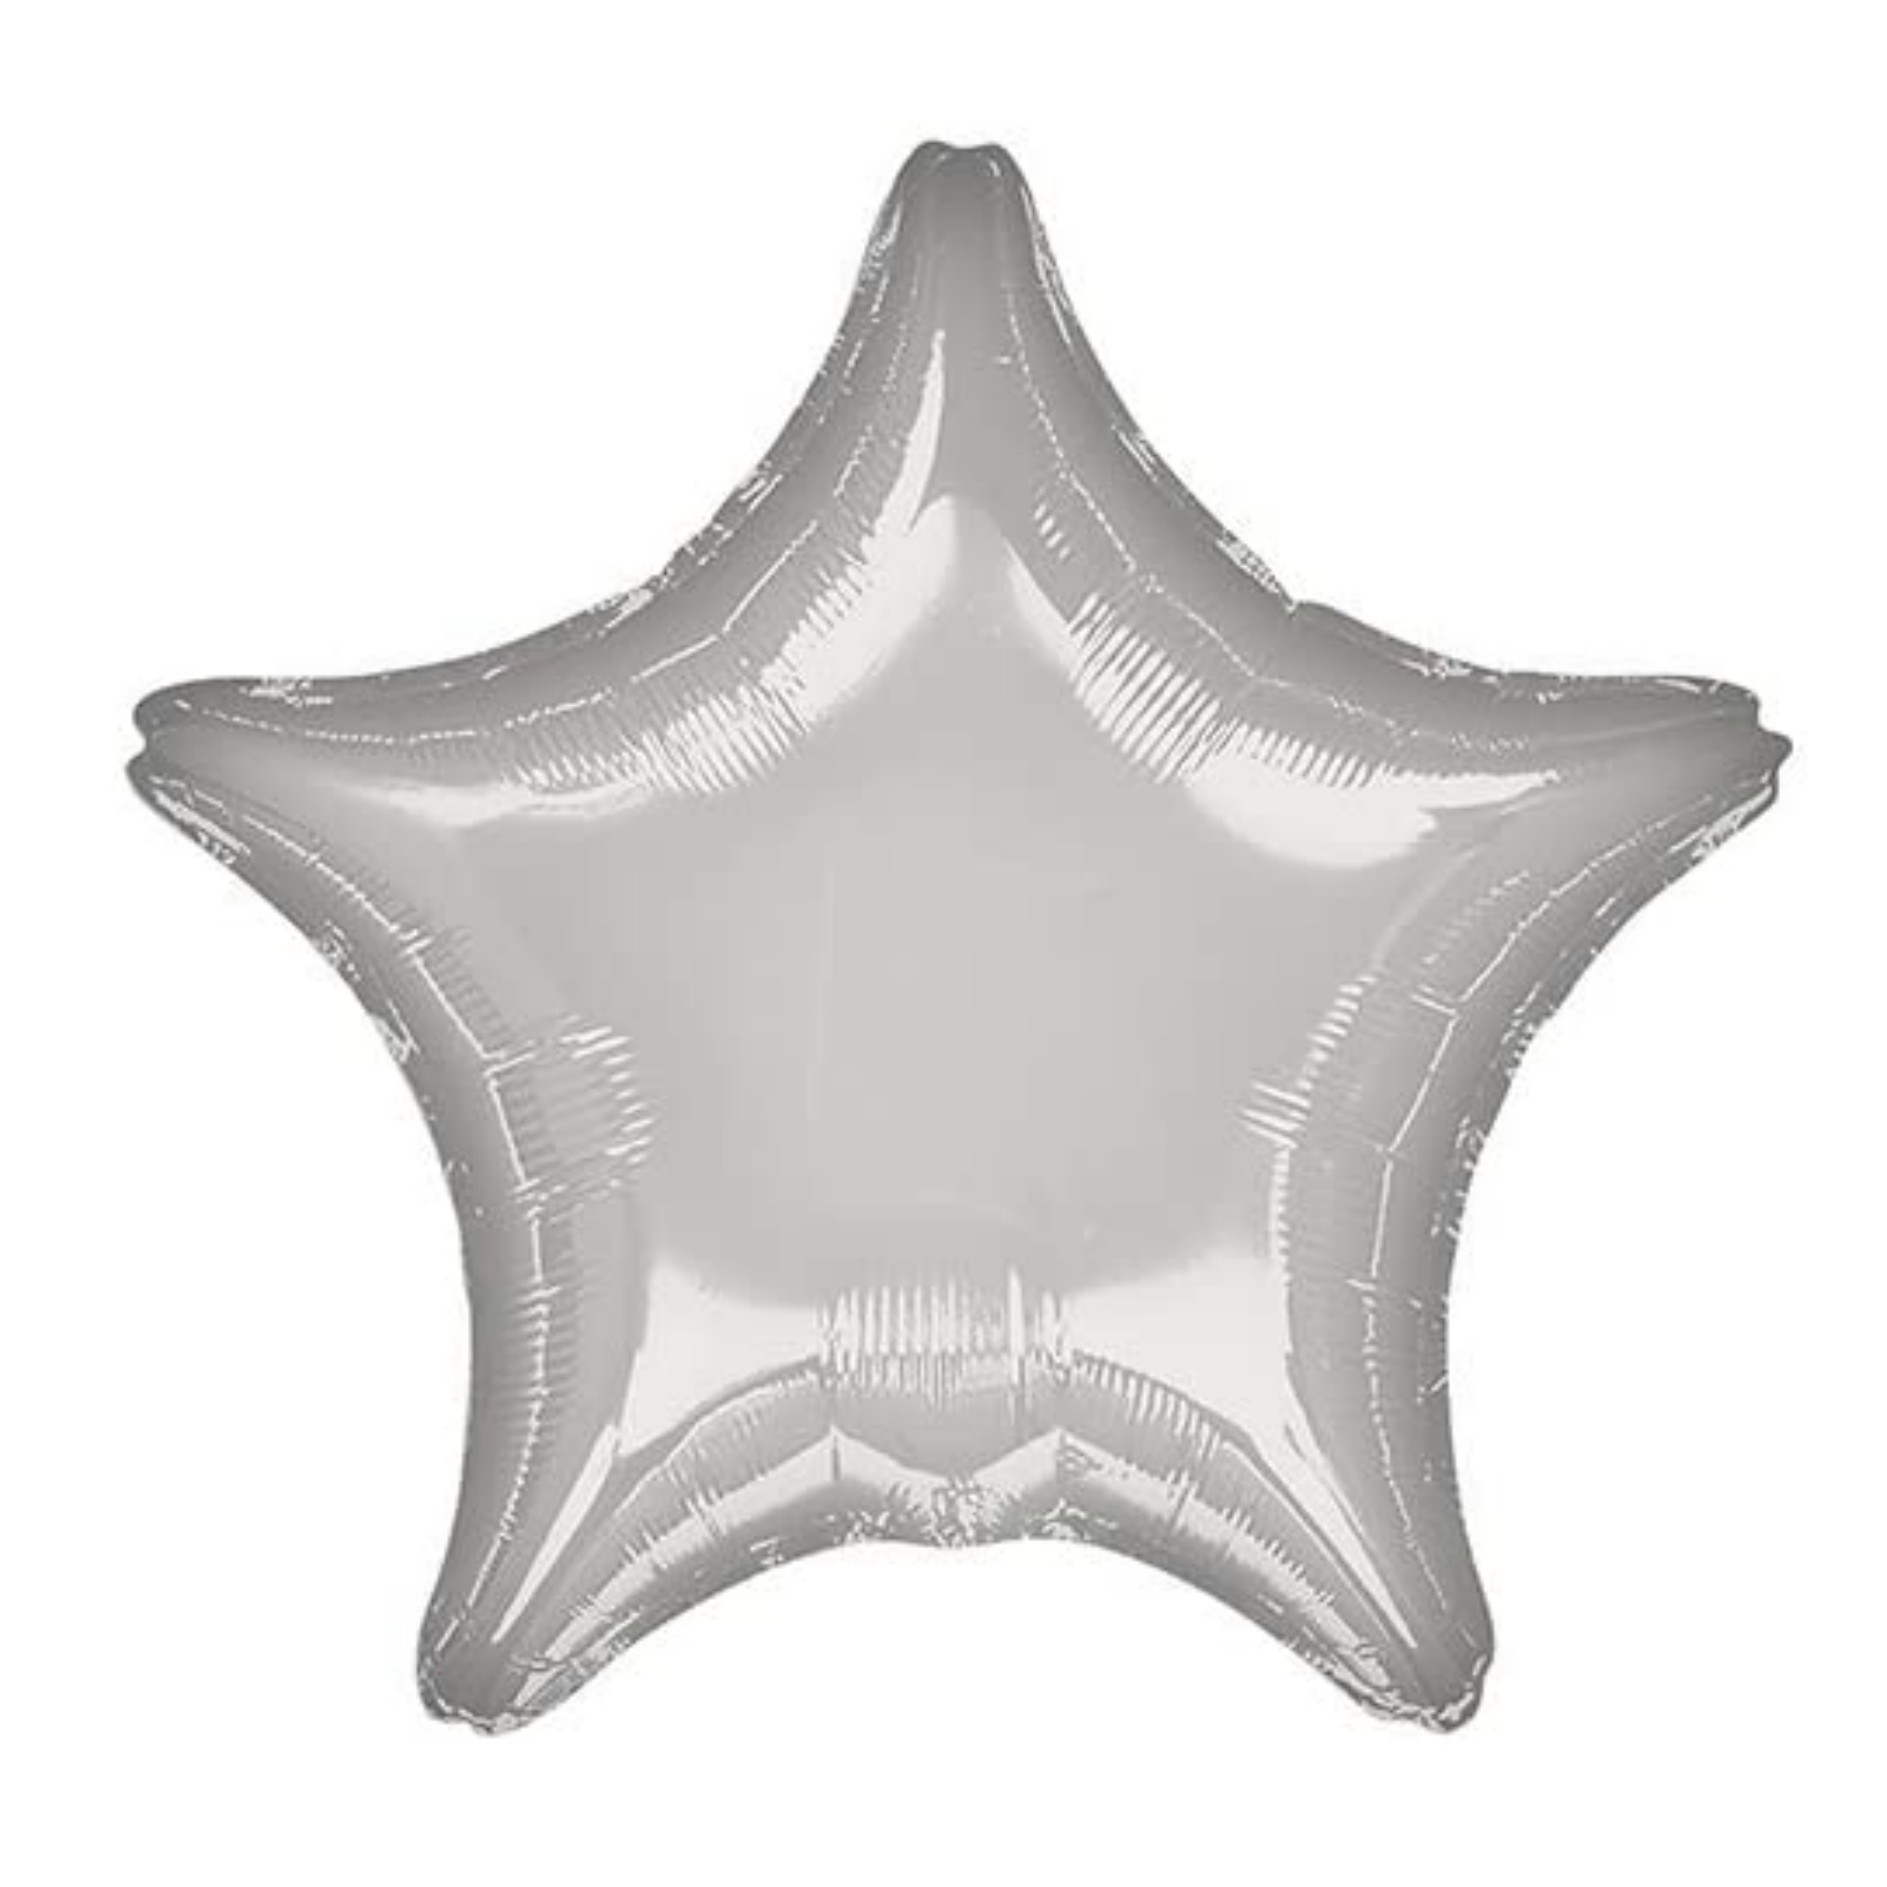 https://www.national5and10.com/wp-content/uploads/2020/05/1922-Silver-Foil-Star-Balloon.jpg